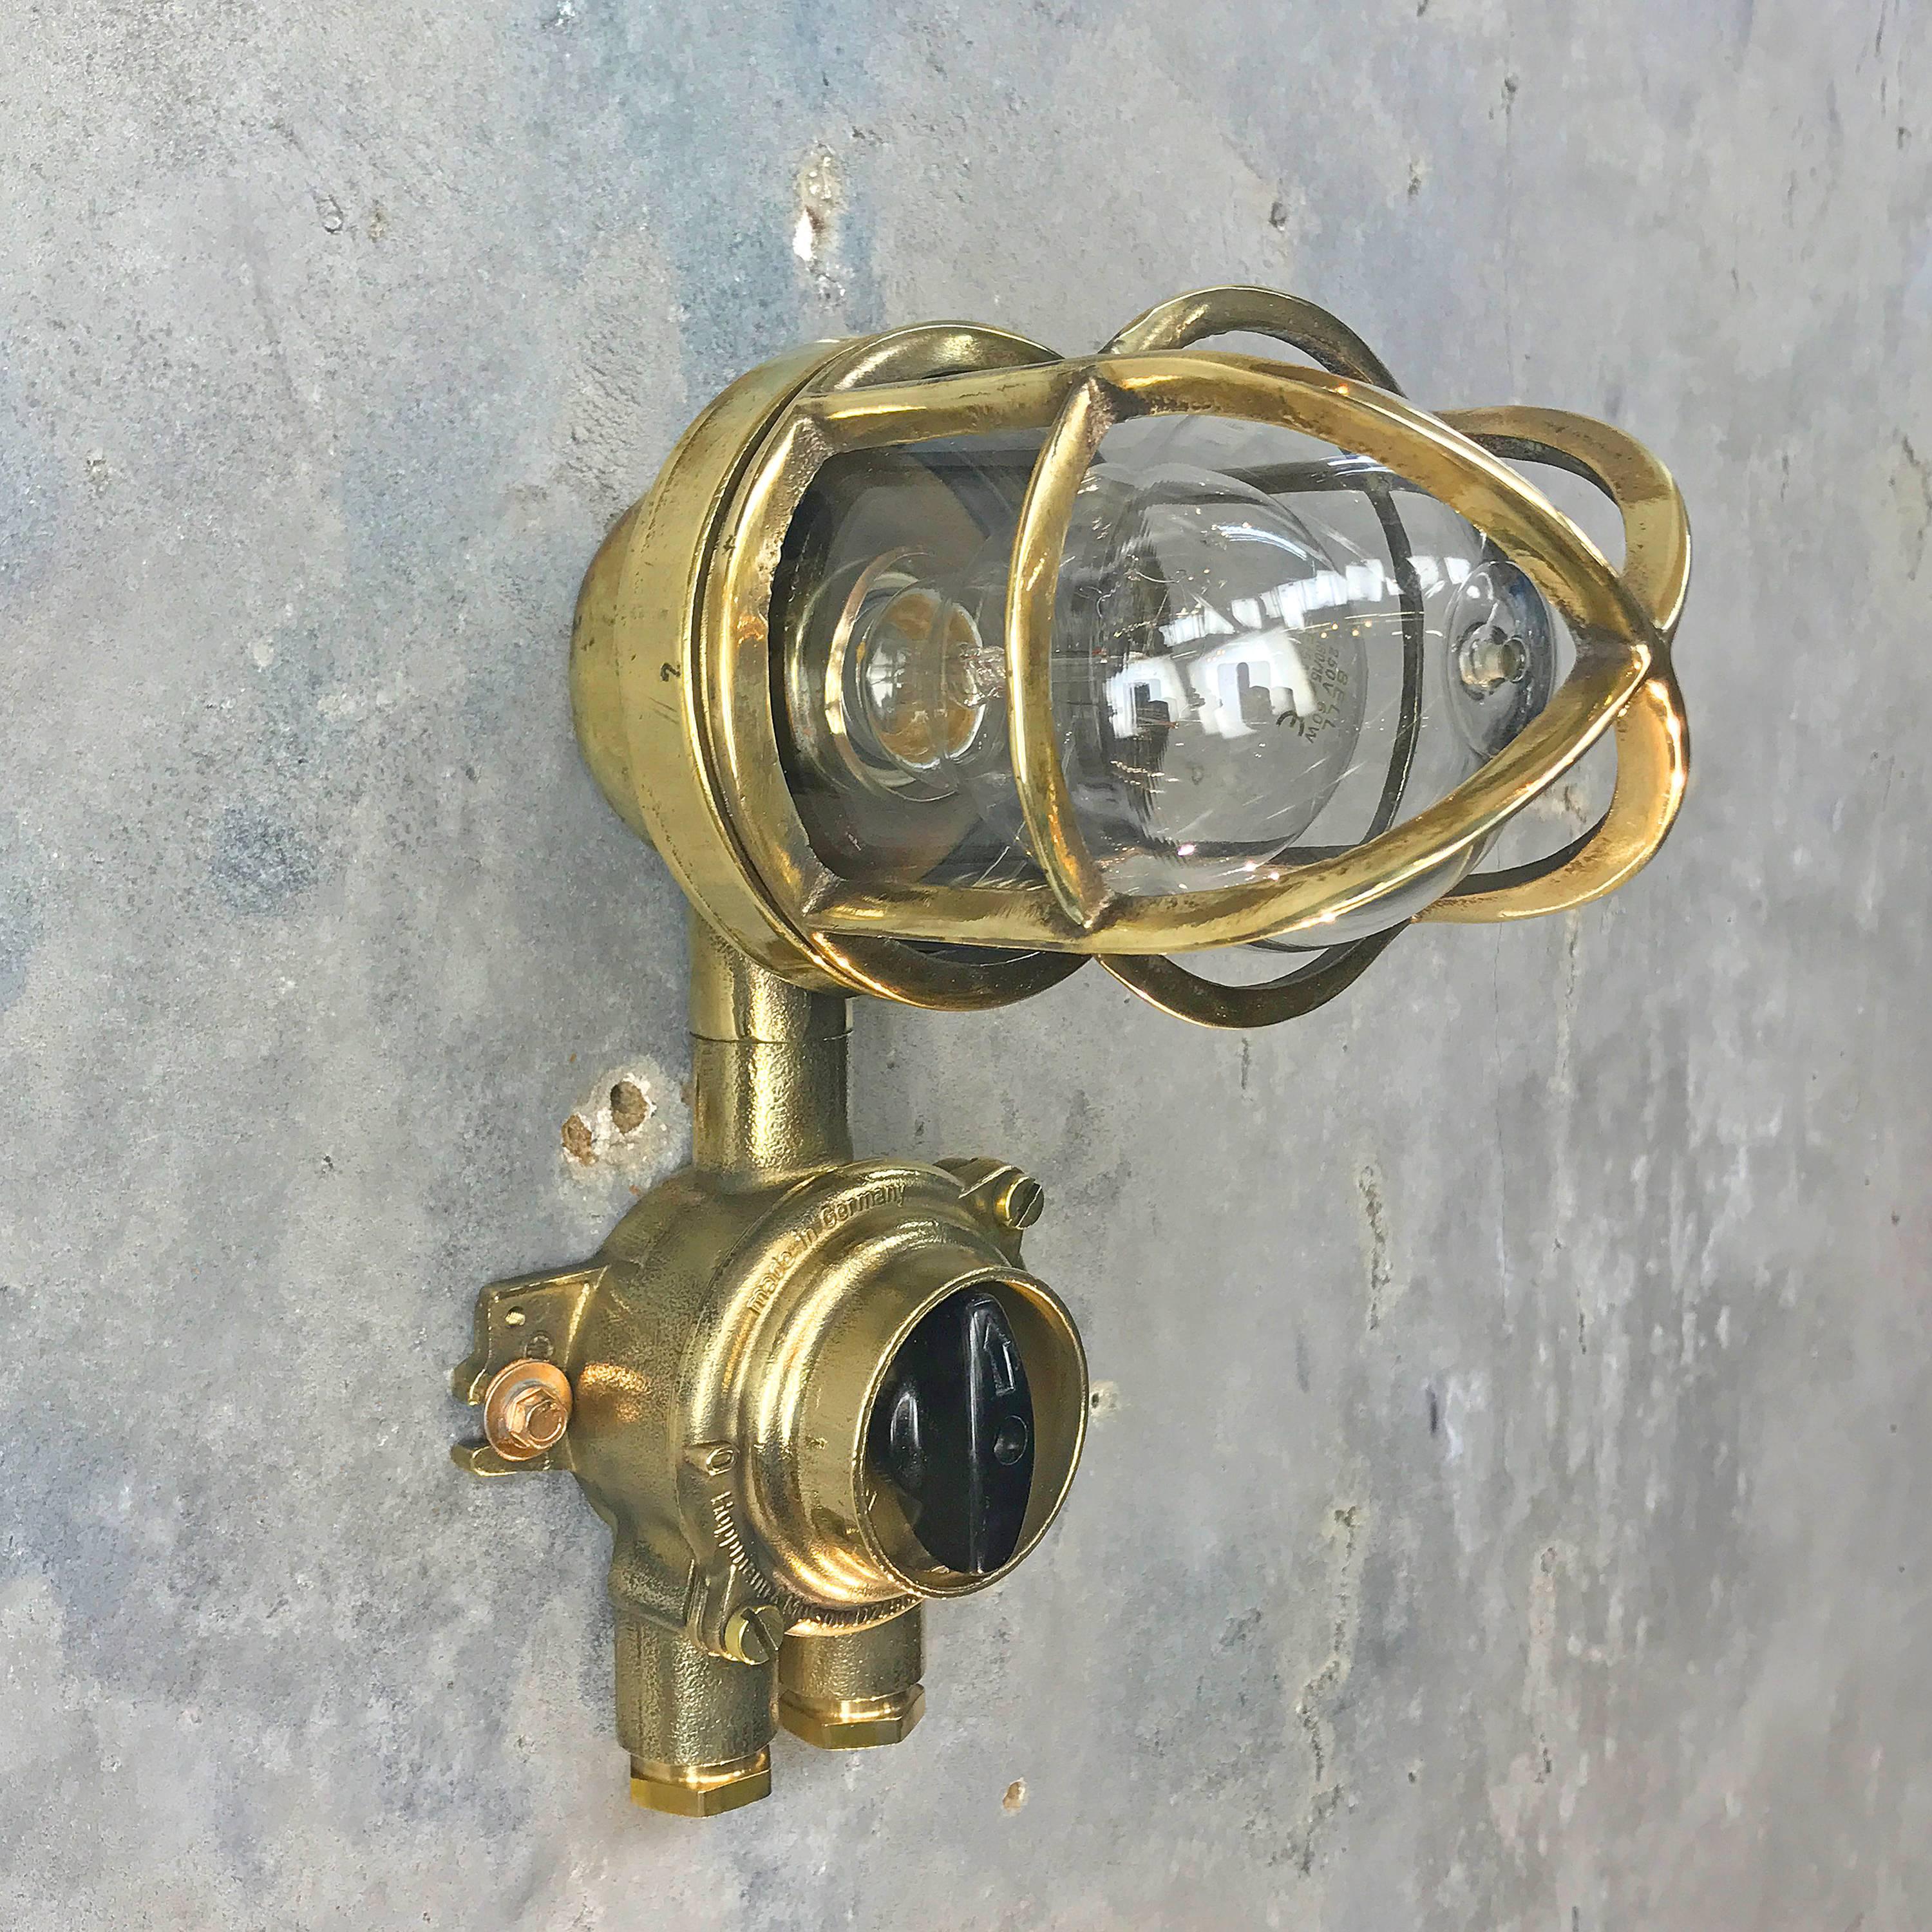 1970's German Brass Wall Lamp with Glass Dome & Isolator Switch IP54 Edison Bulb For Sale 2